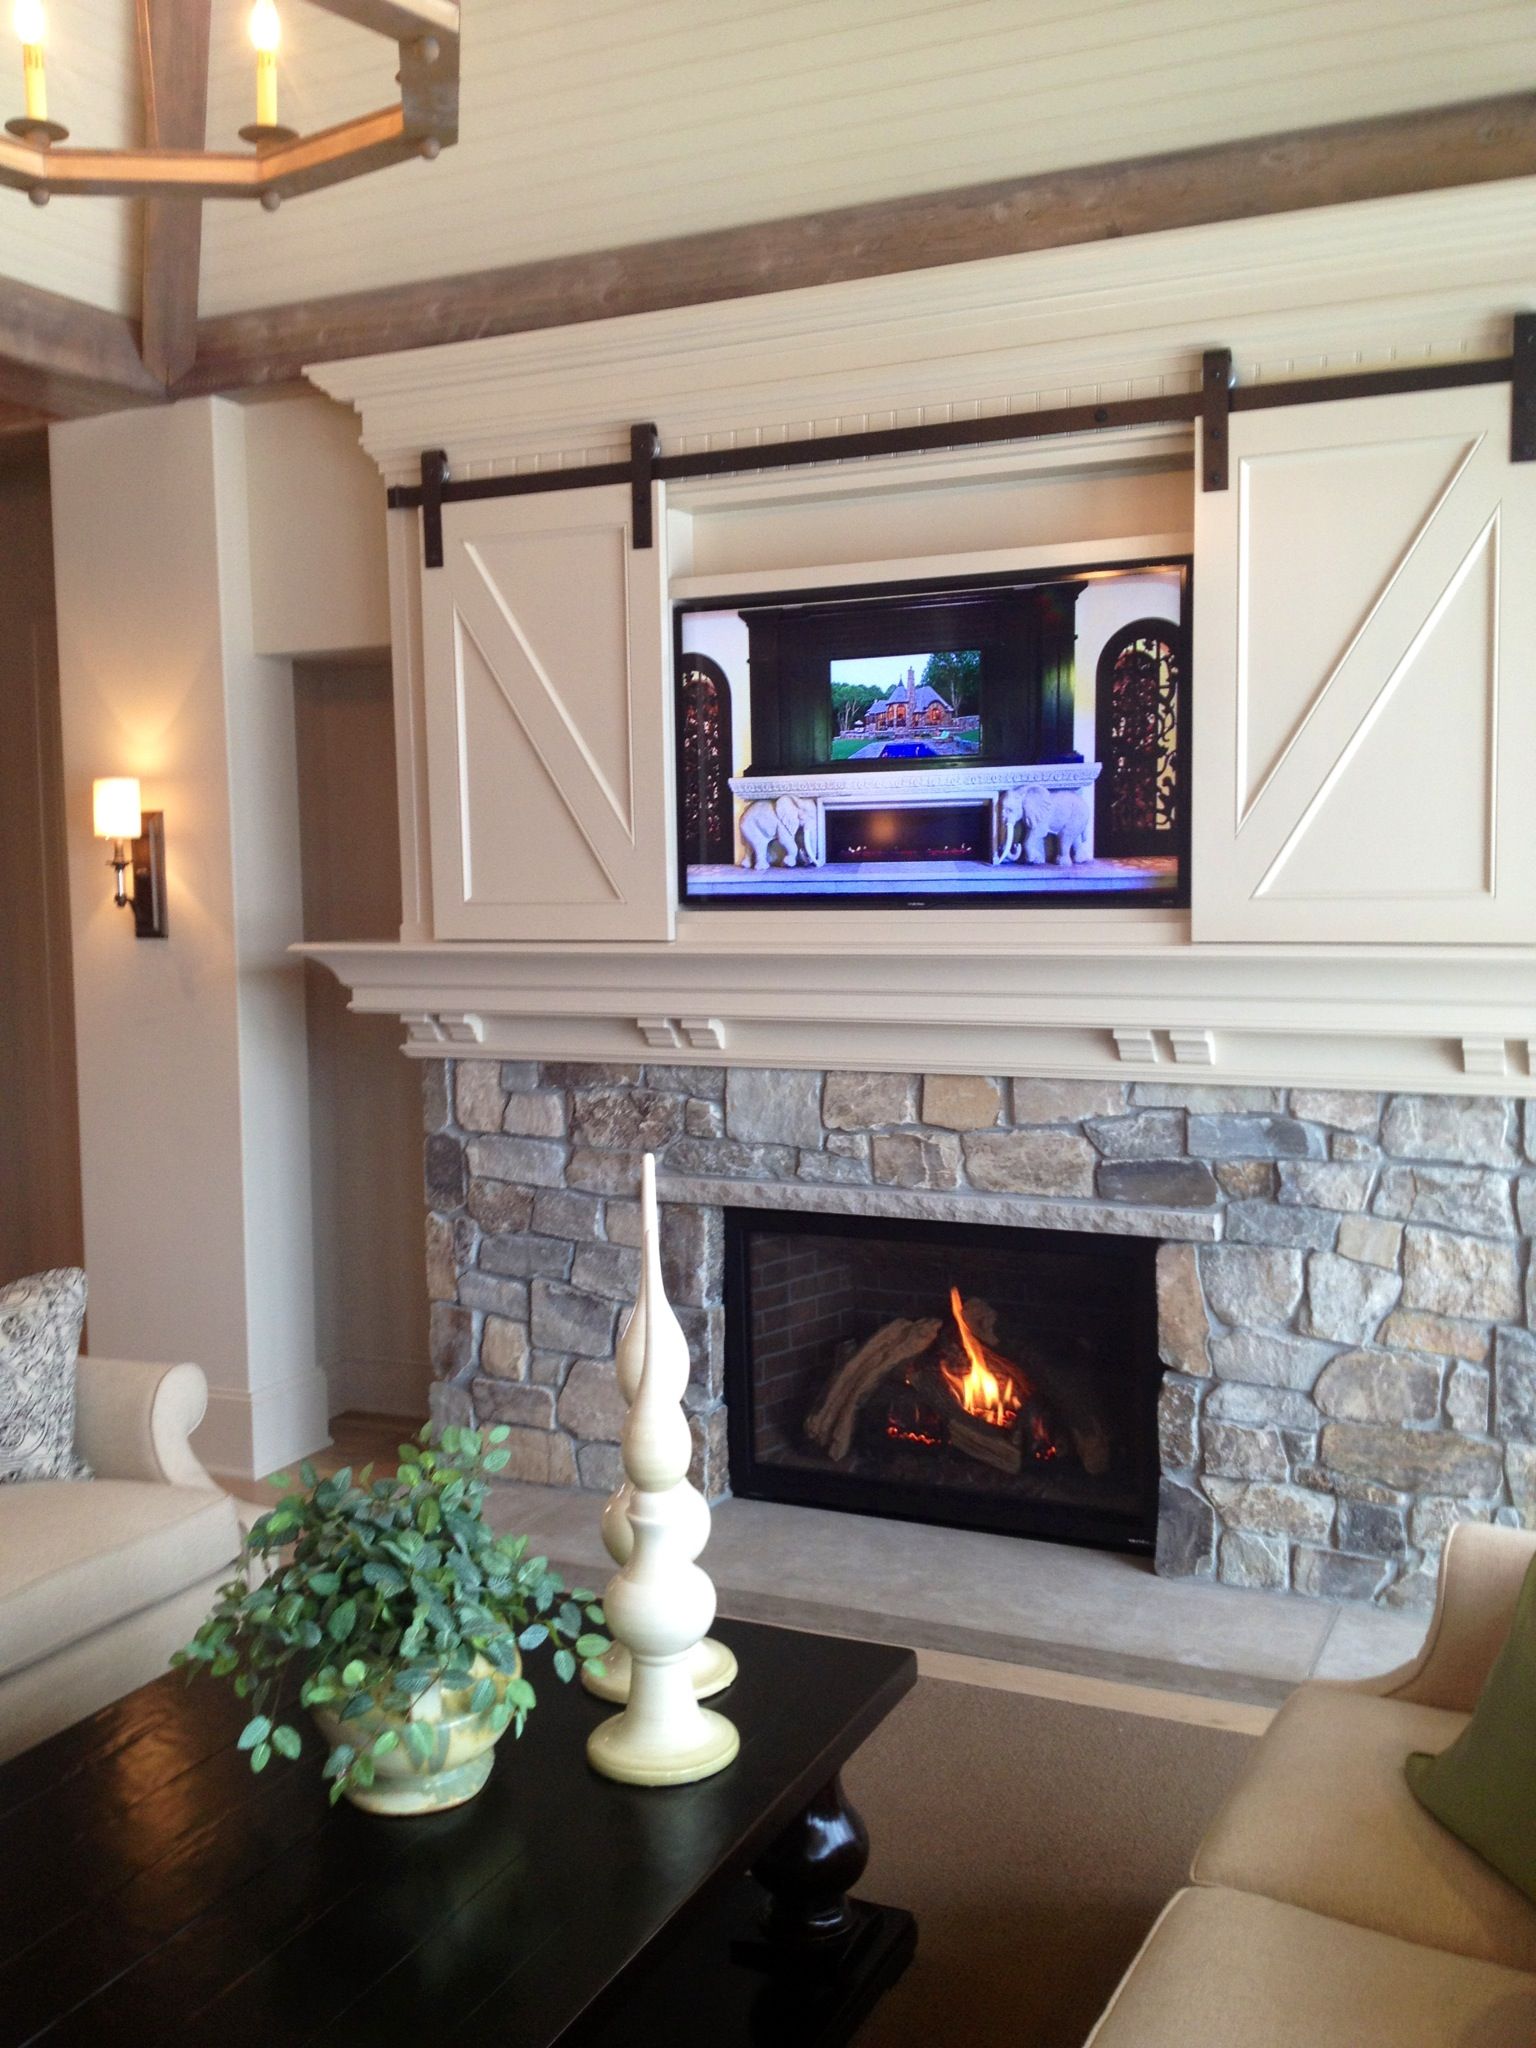 Sliding Barn Door Tv Stand with Fireplace Beautiful Barn Door for the Tv Fireplace